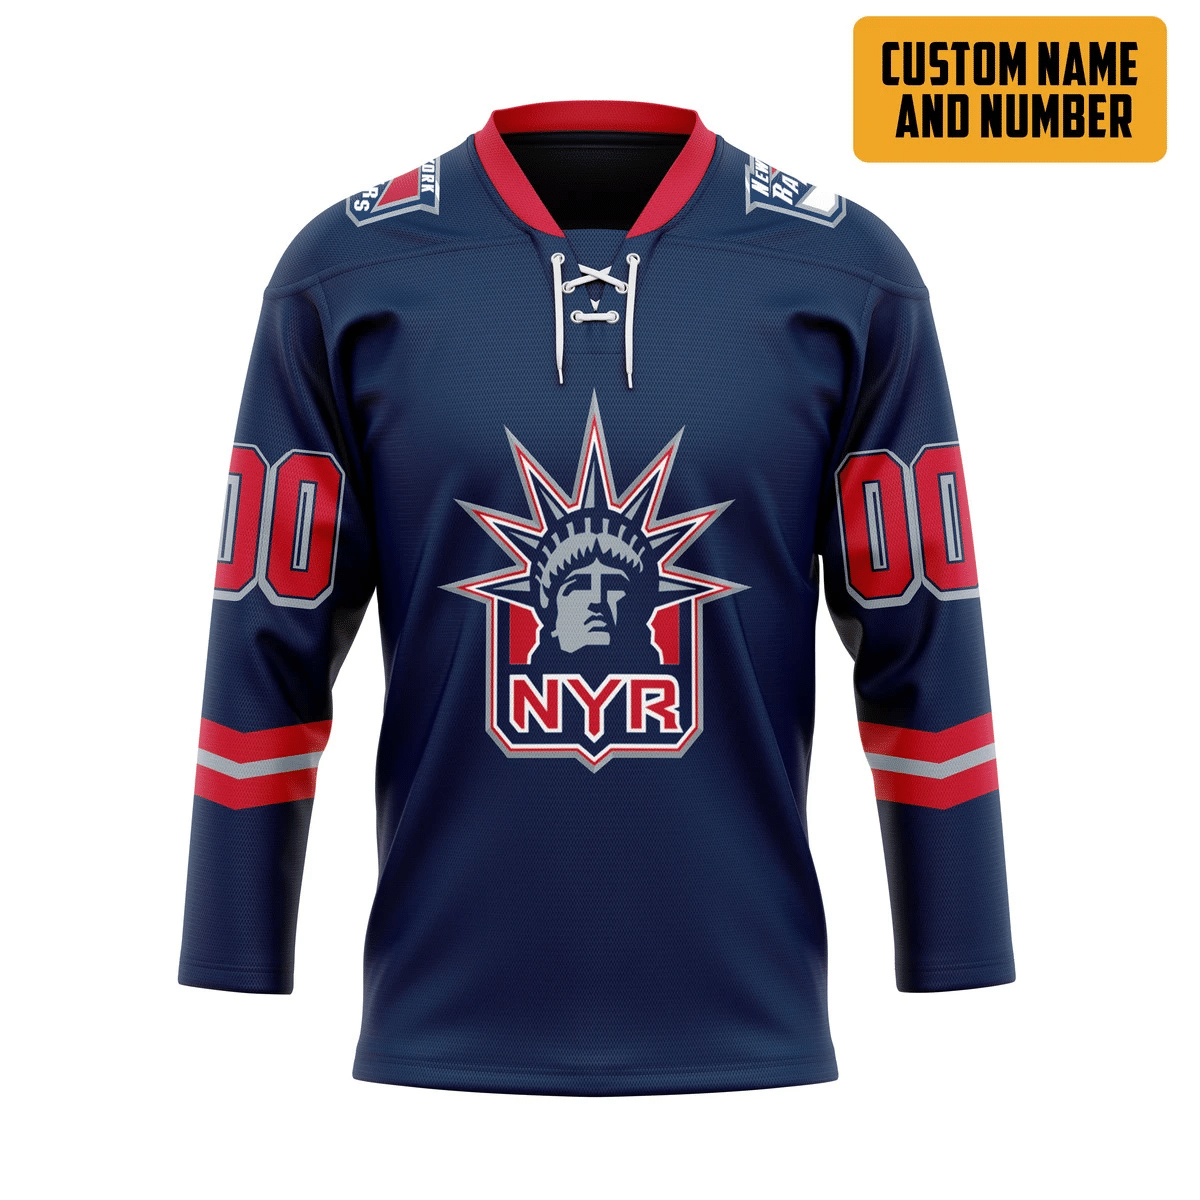 Check out our collection of unique and stylish hockey jerseys from all over the world 98